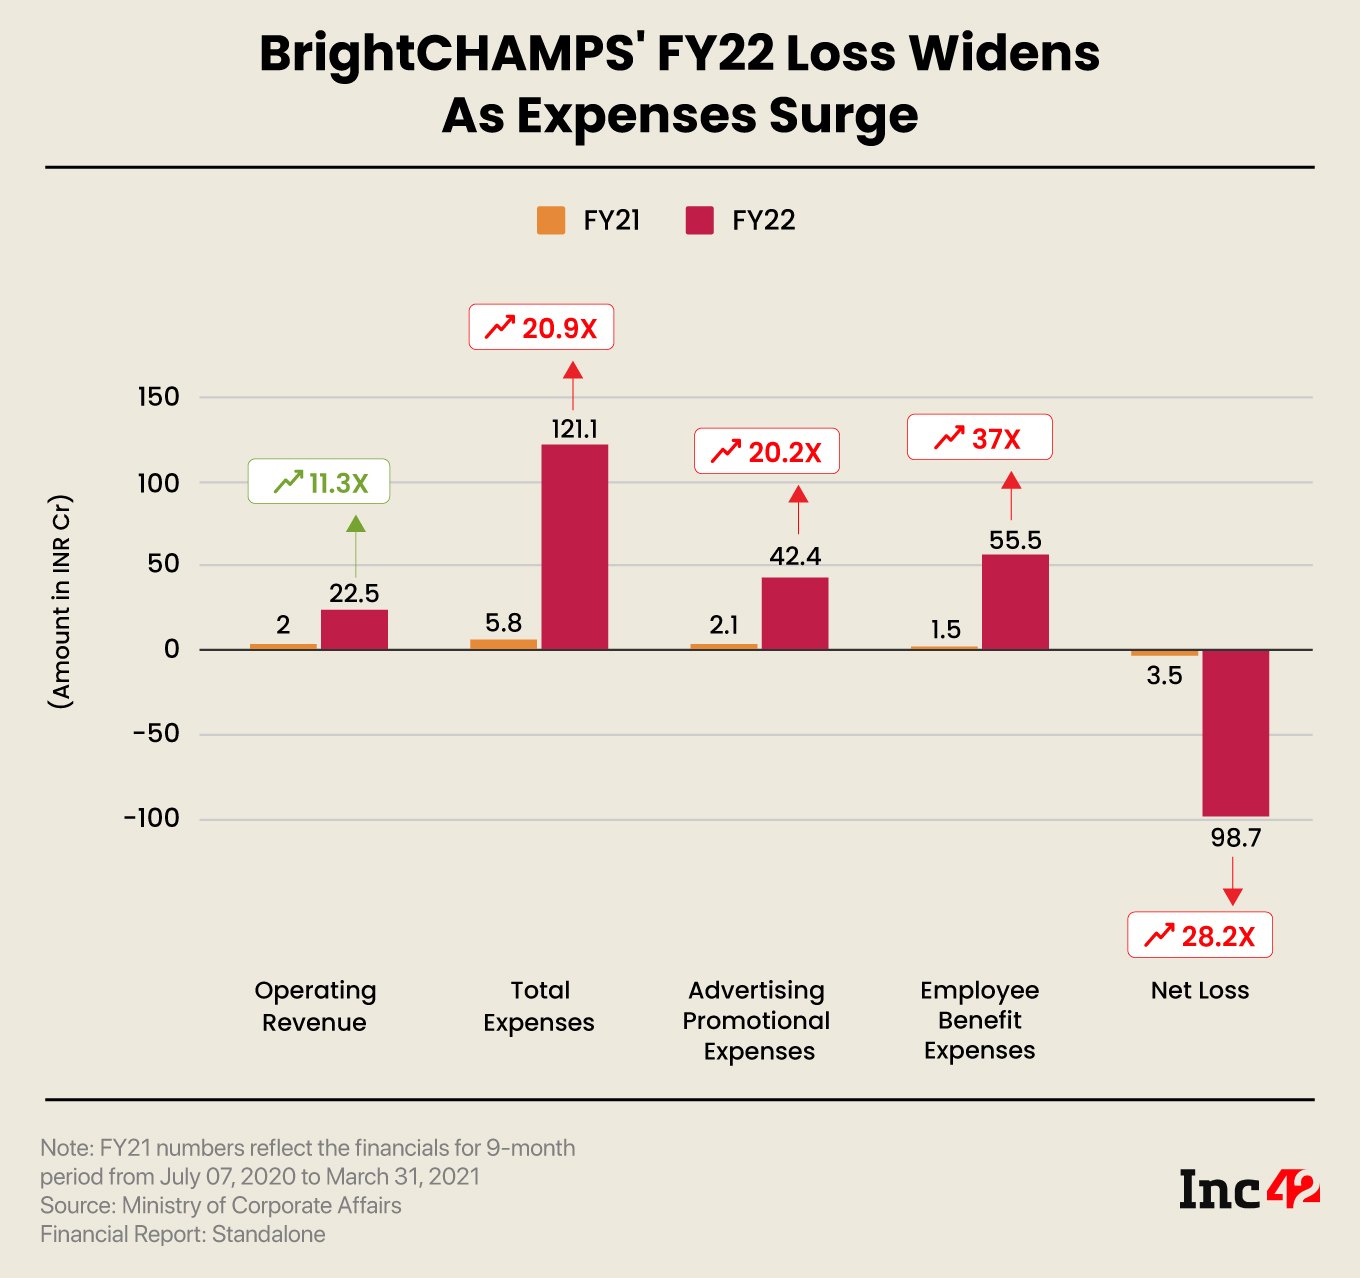 BrightCHAMPS' FY22 Loss Widens As Expenses Surge